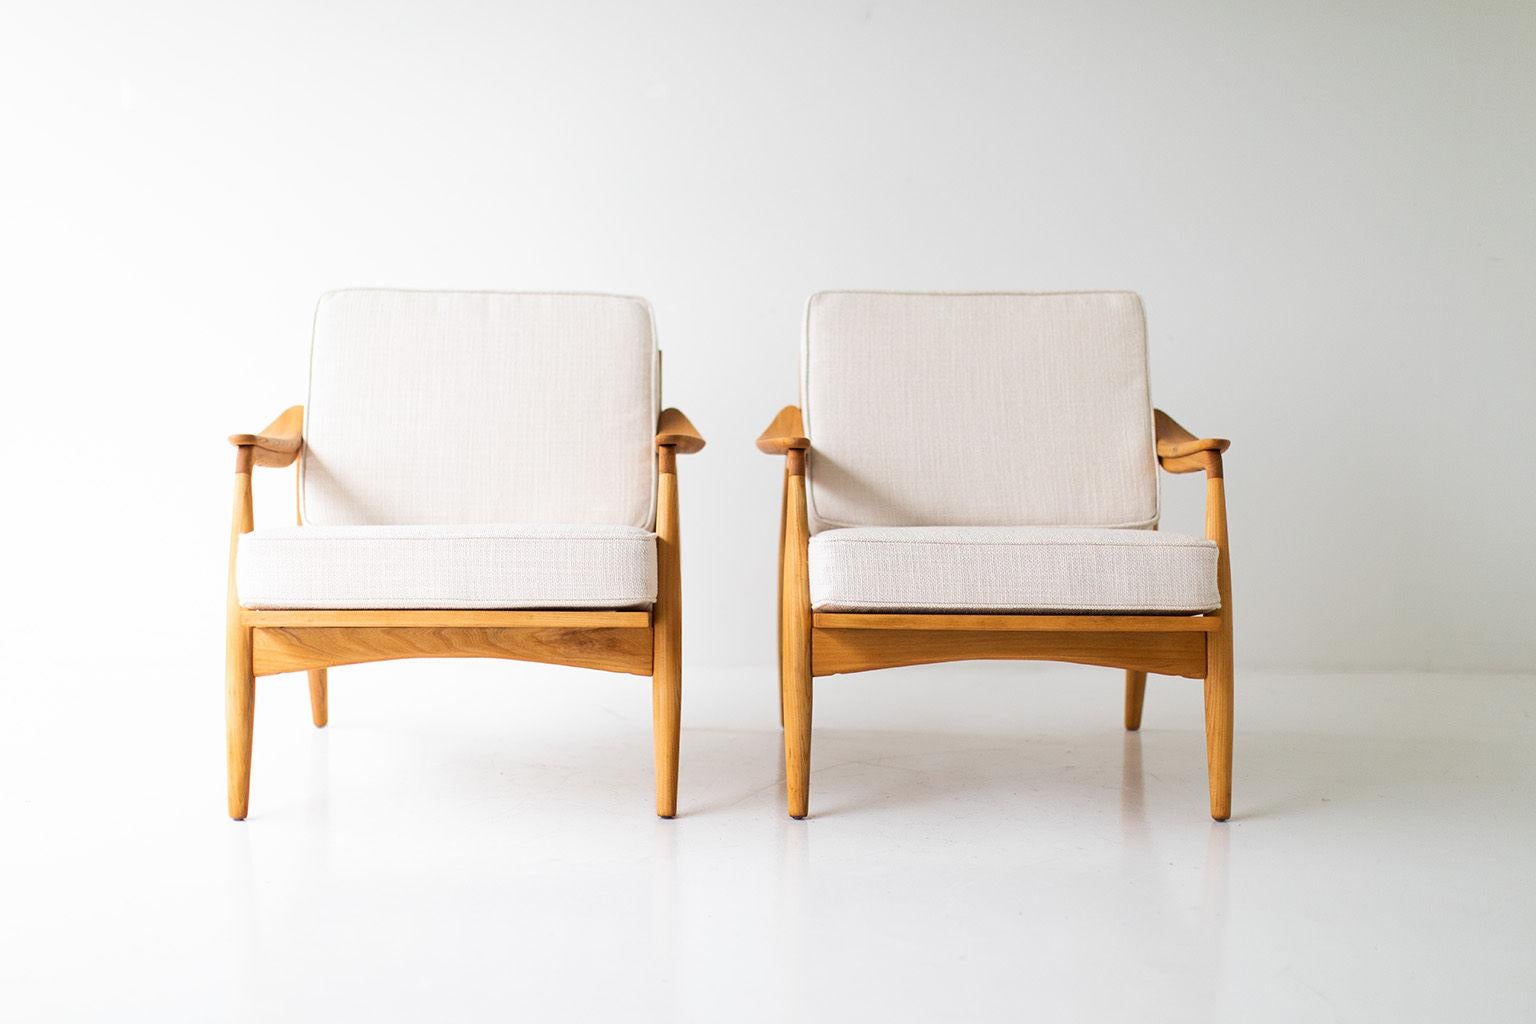 Designer: Lawrence Peabody.

Manufacturer: Nemschoff.
Period/Model: Mid-Century Modern.
Specs: Elm, Thick Weave Fabric.

Condition:

These Lawrence Peabody lounge chairs for Richardson Nemschoff are in excellent restored condition. The elm